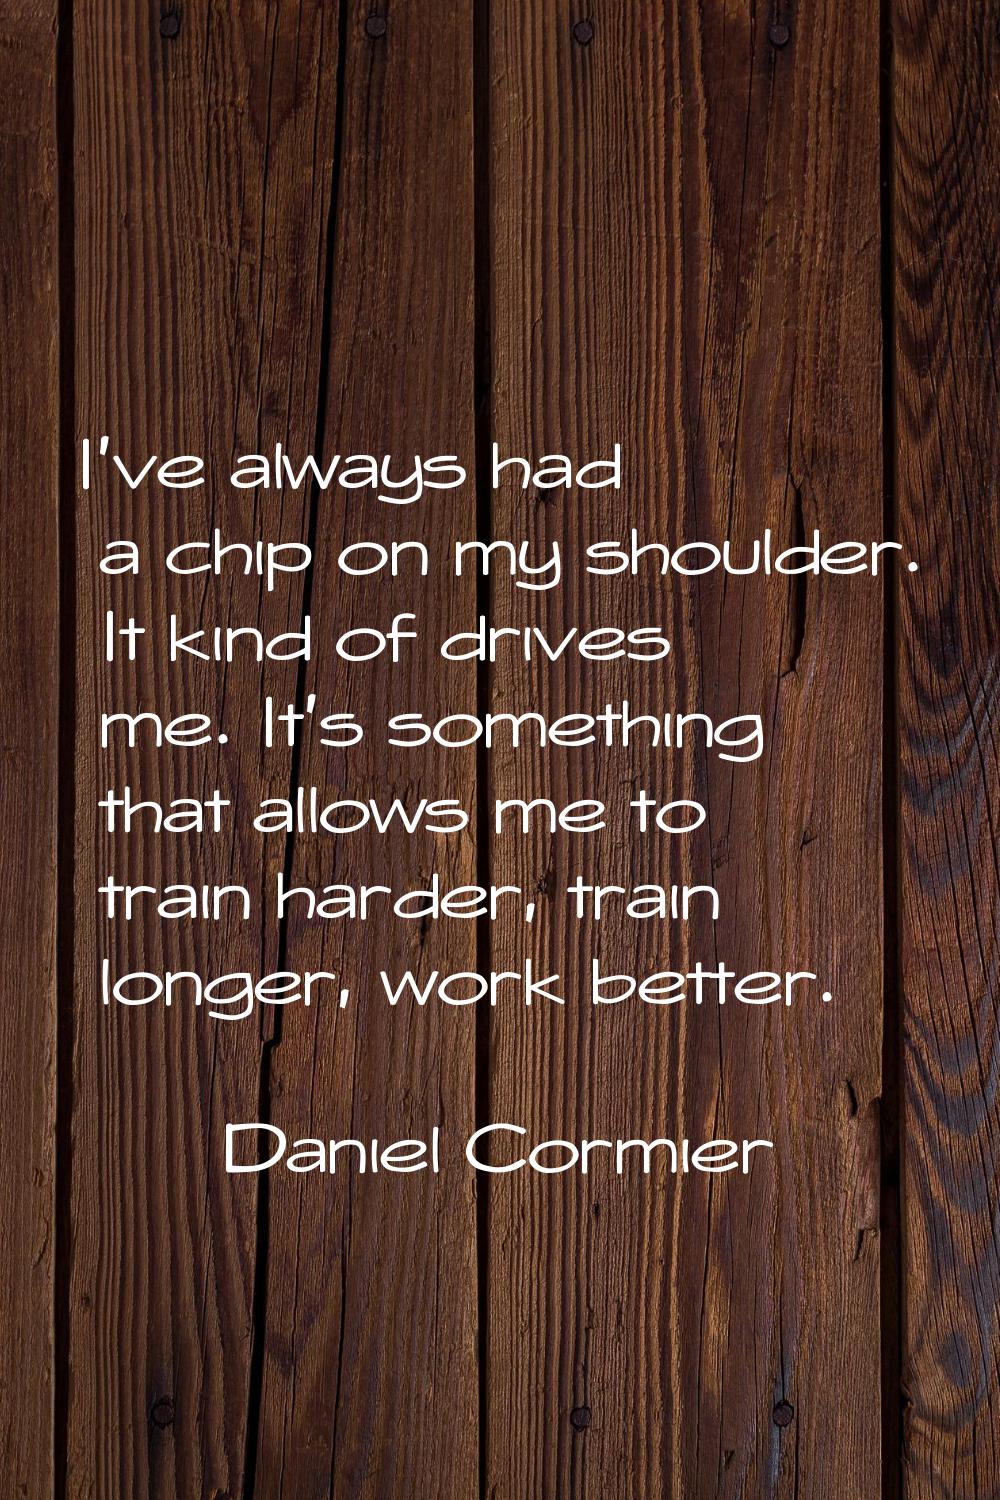 I've always had a chip on my shoulder. It kind of drives me. It's something that allows me to train